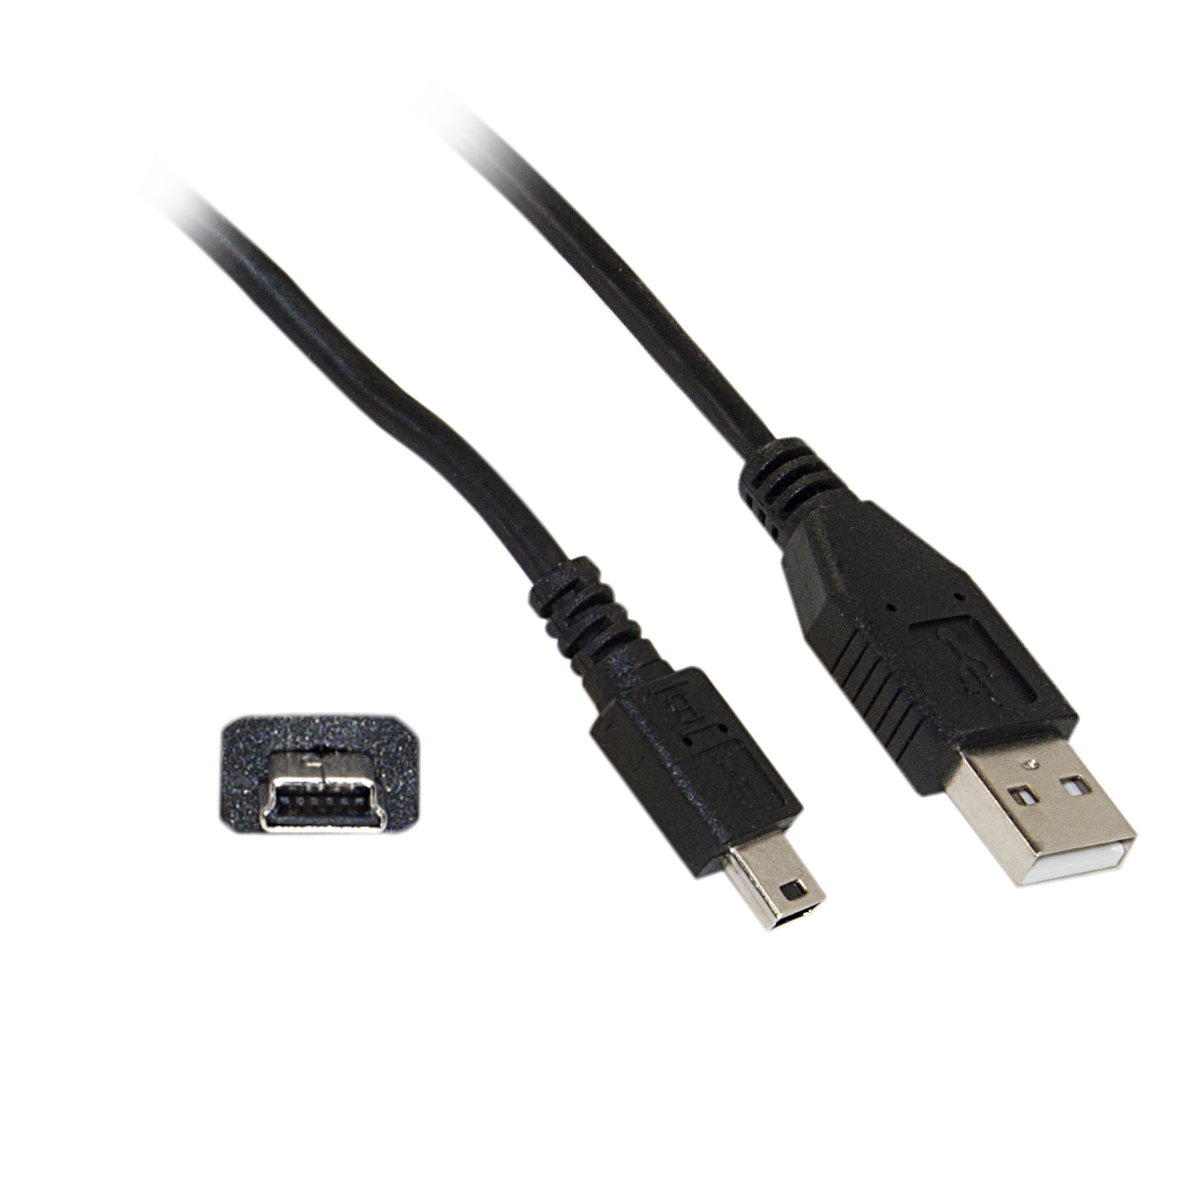 Hi-Speed USB 2.0 Cable Type A Male to Type A Female Extension Cable 3FT 6FT 10FT 